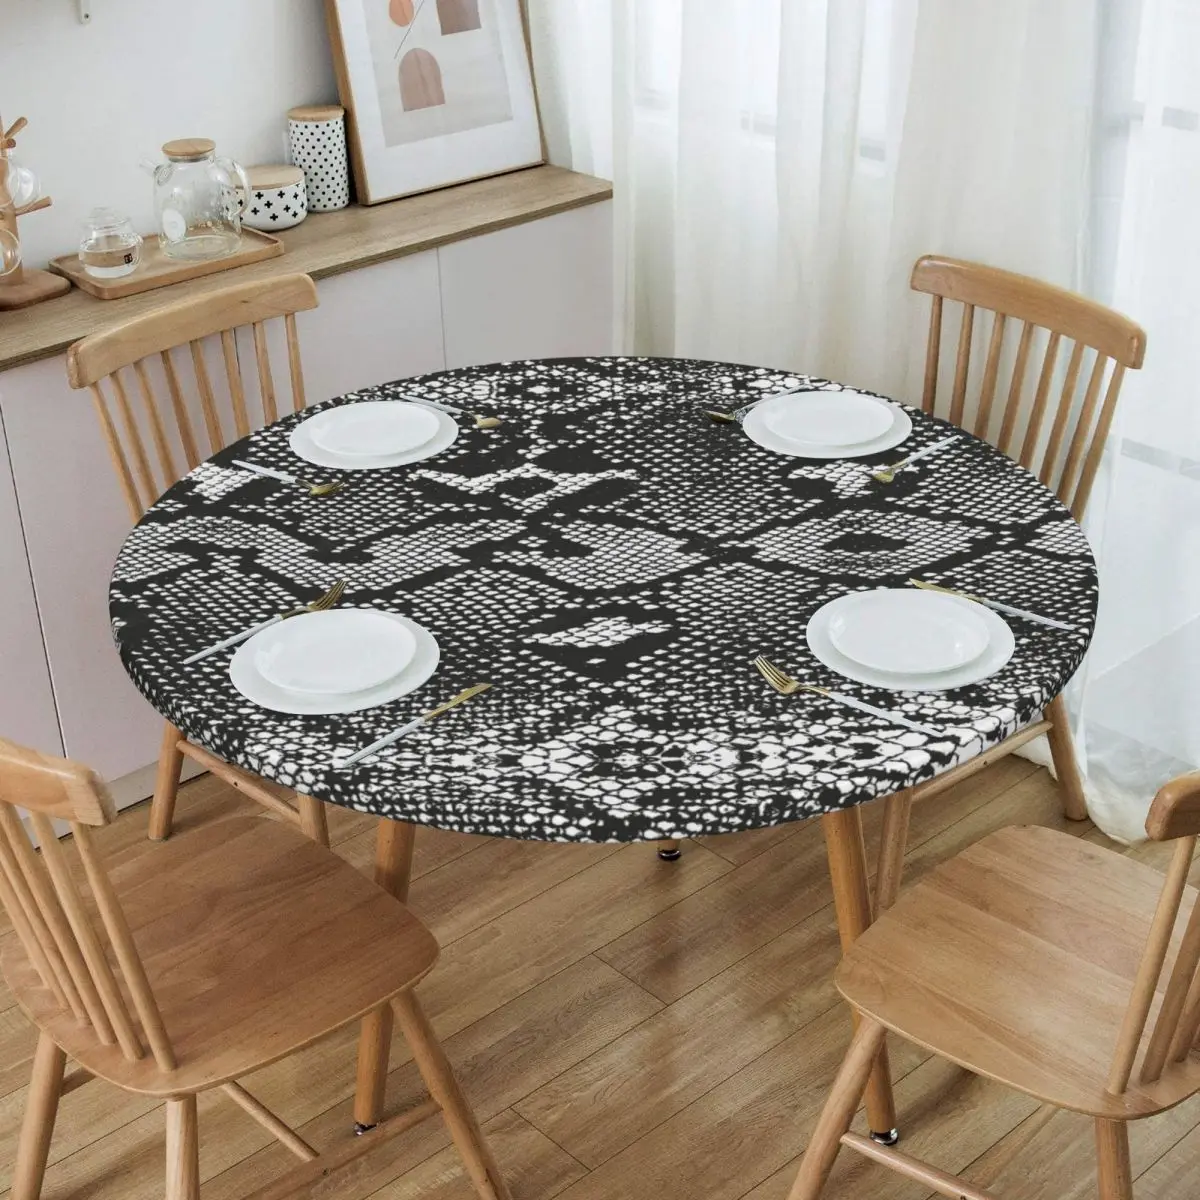 

Round Waterproof Oil-Proof Snake Grey Skin Texture Tablecloth Backing Elastic Edge Table Cover Fit Snakeskin Print Table Cloth